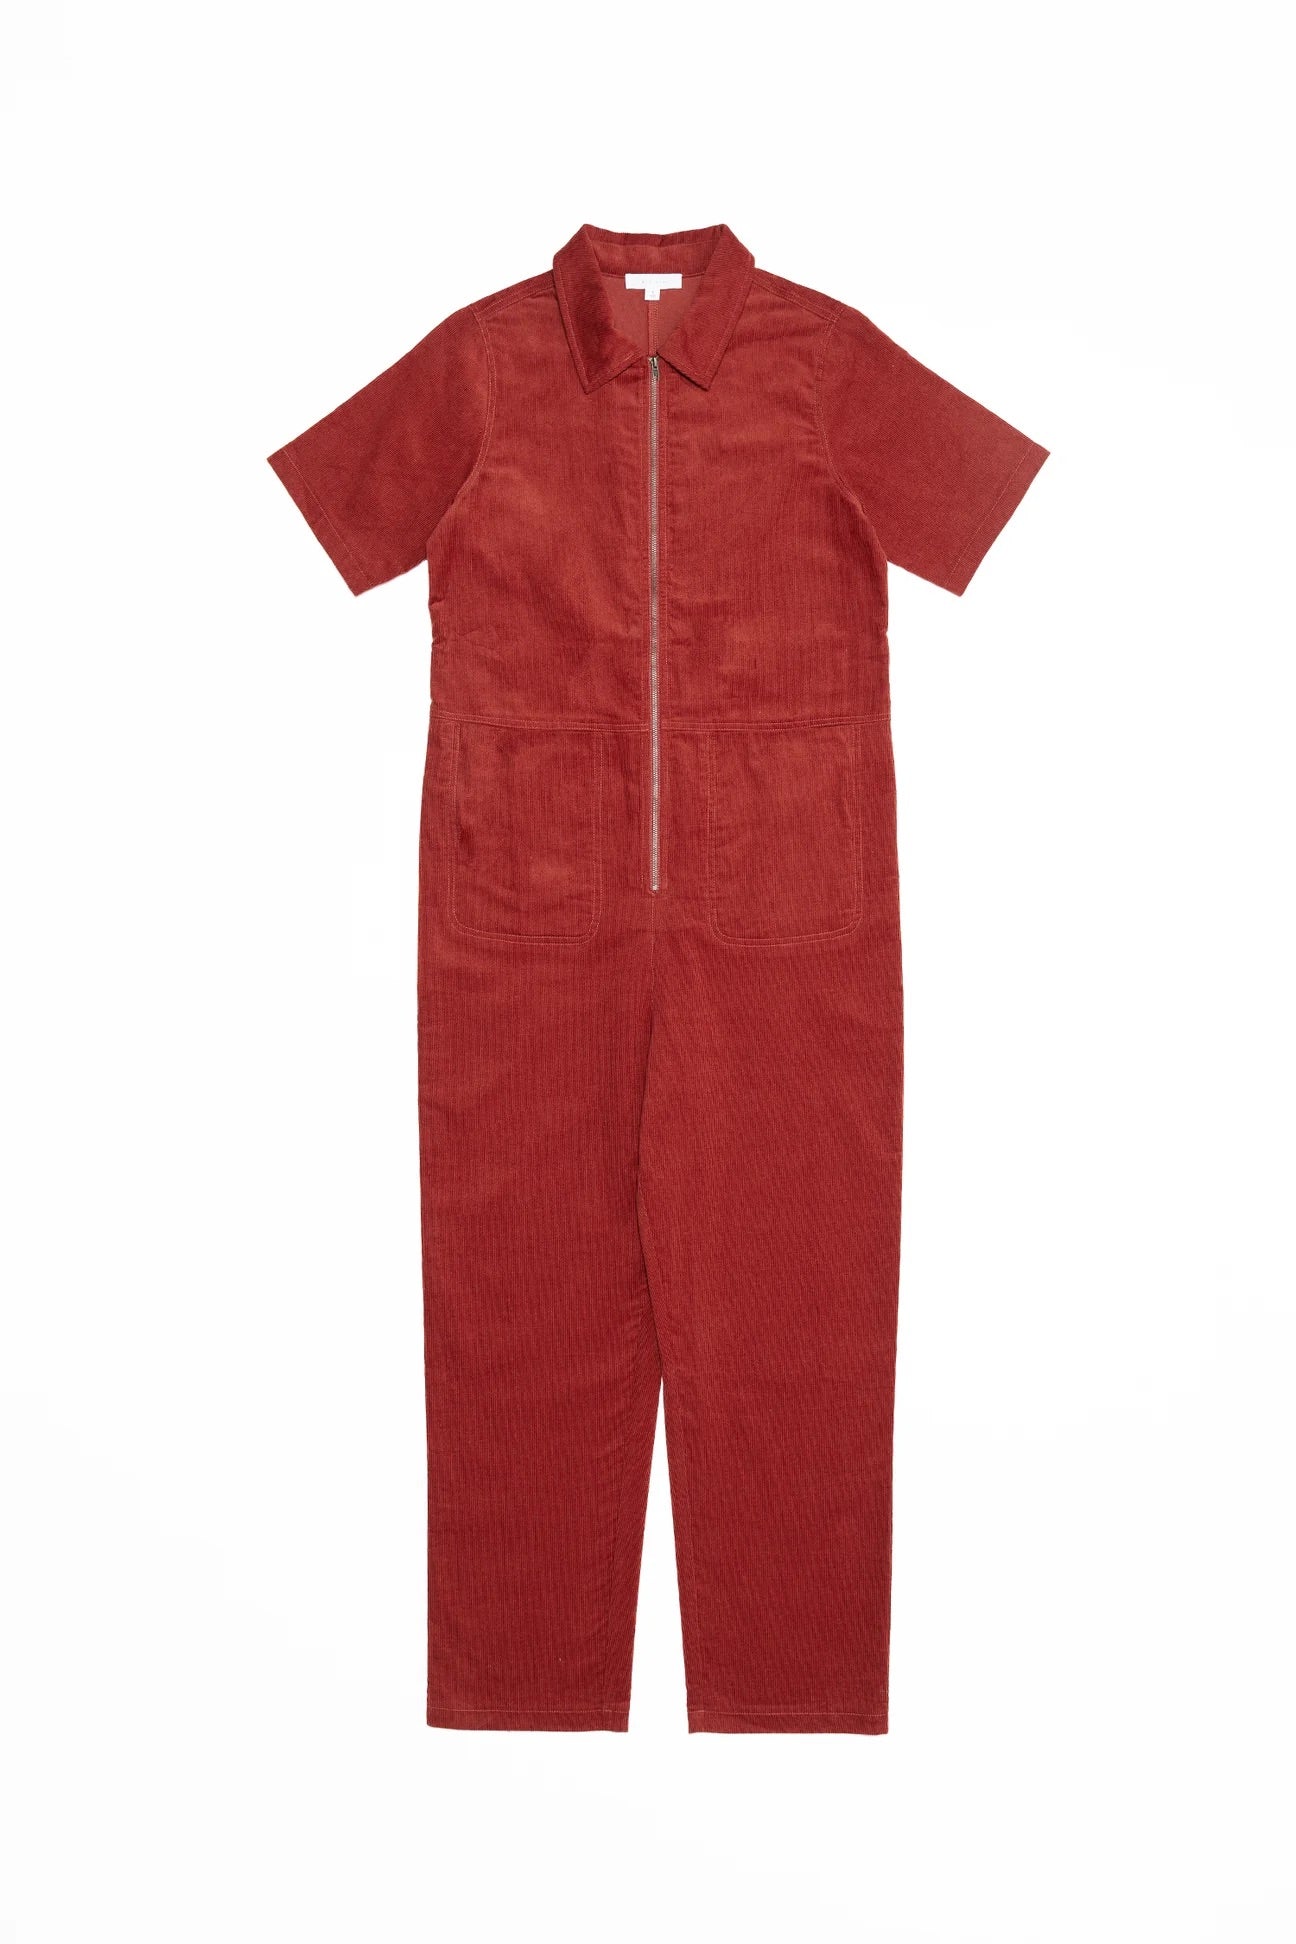 Mod Ref The Colby Jumpsuit in Brick